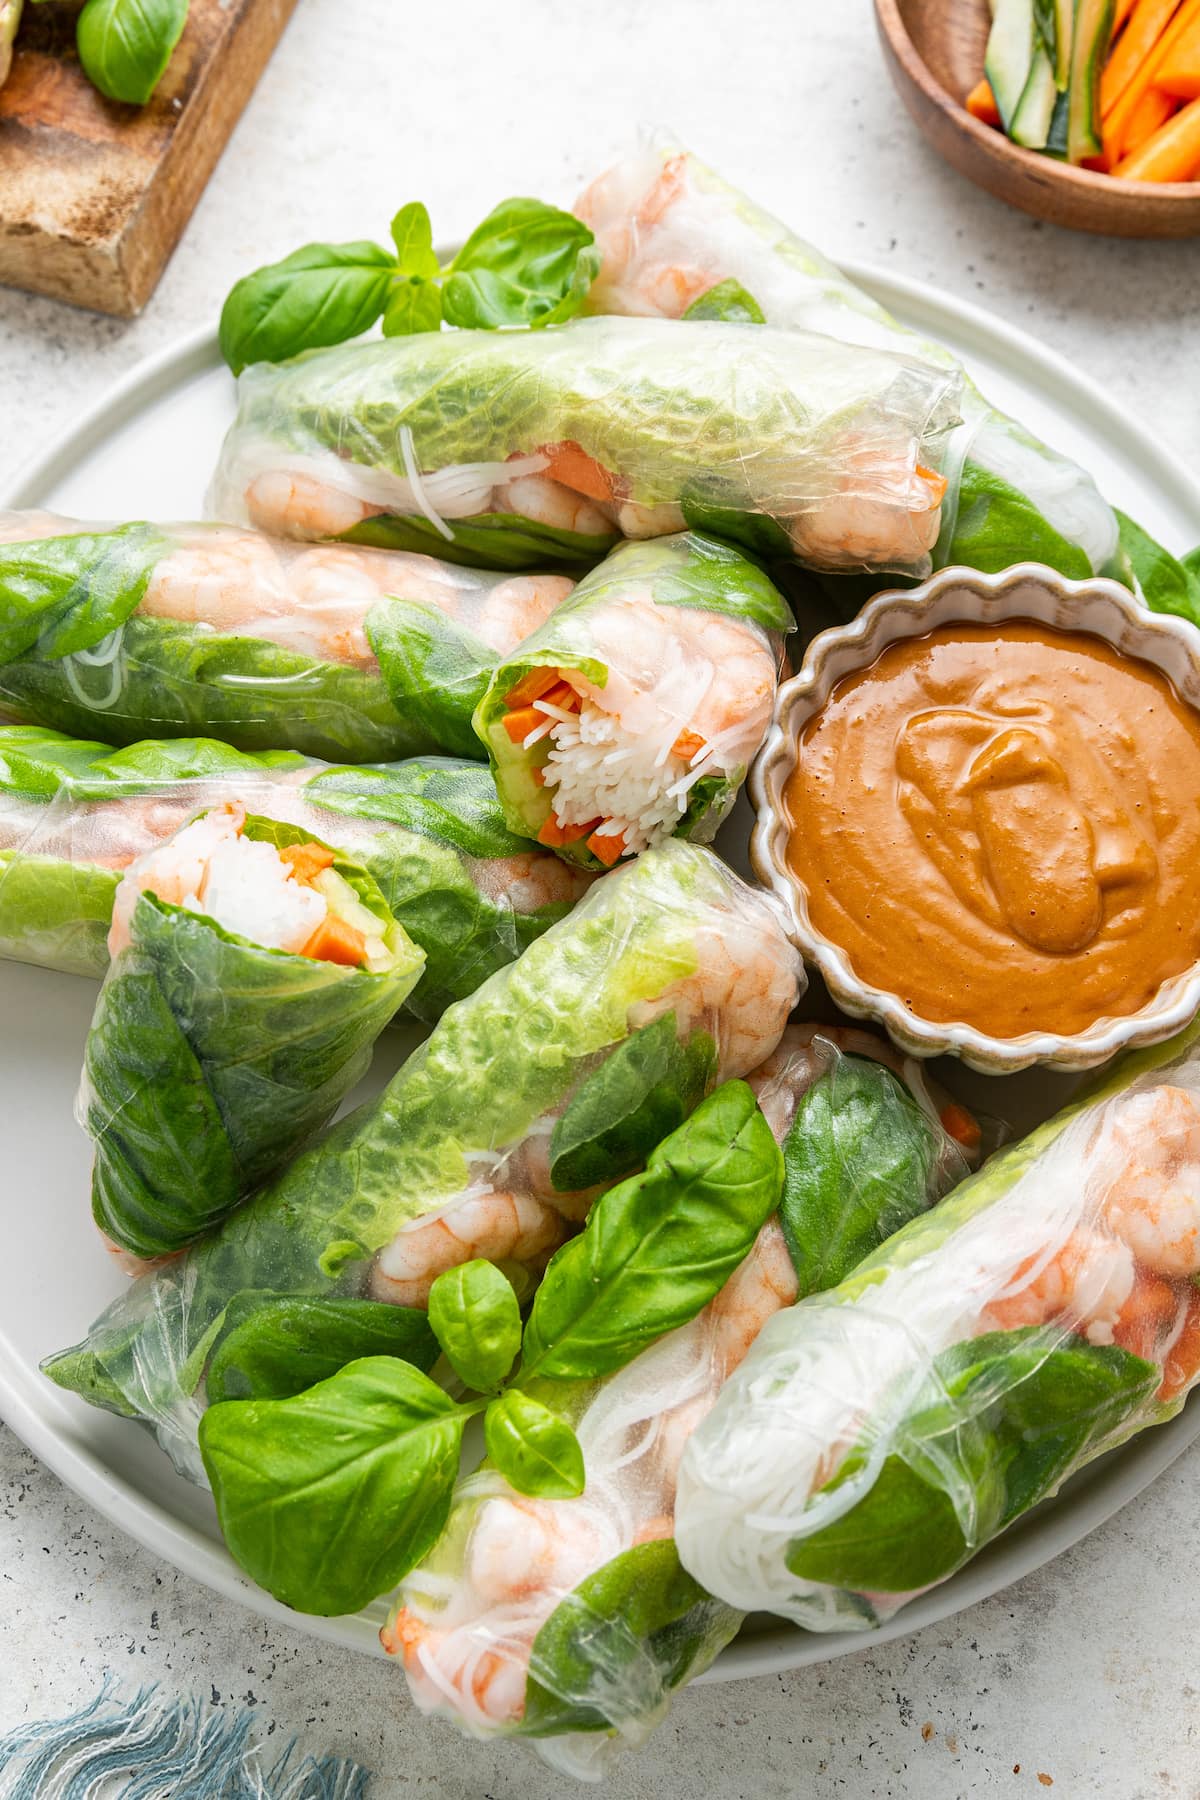 A large white plate with chopsticks containing multiple shrimp spring rolls, some cut in half, and a peanut sauce in a small white bowl.